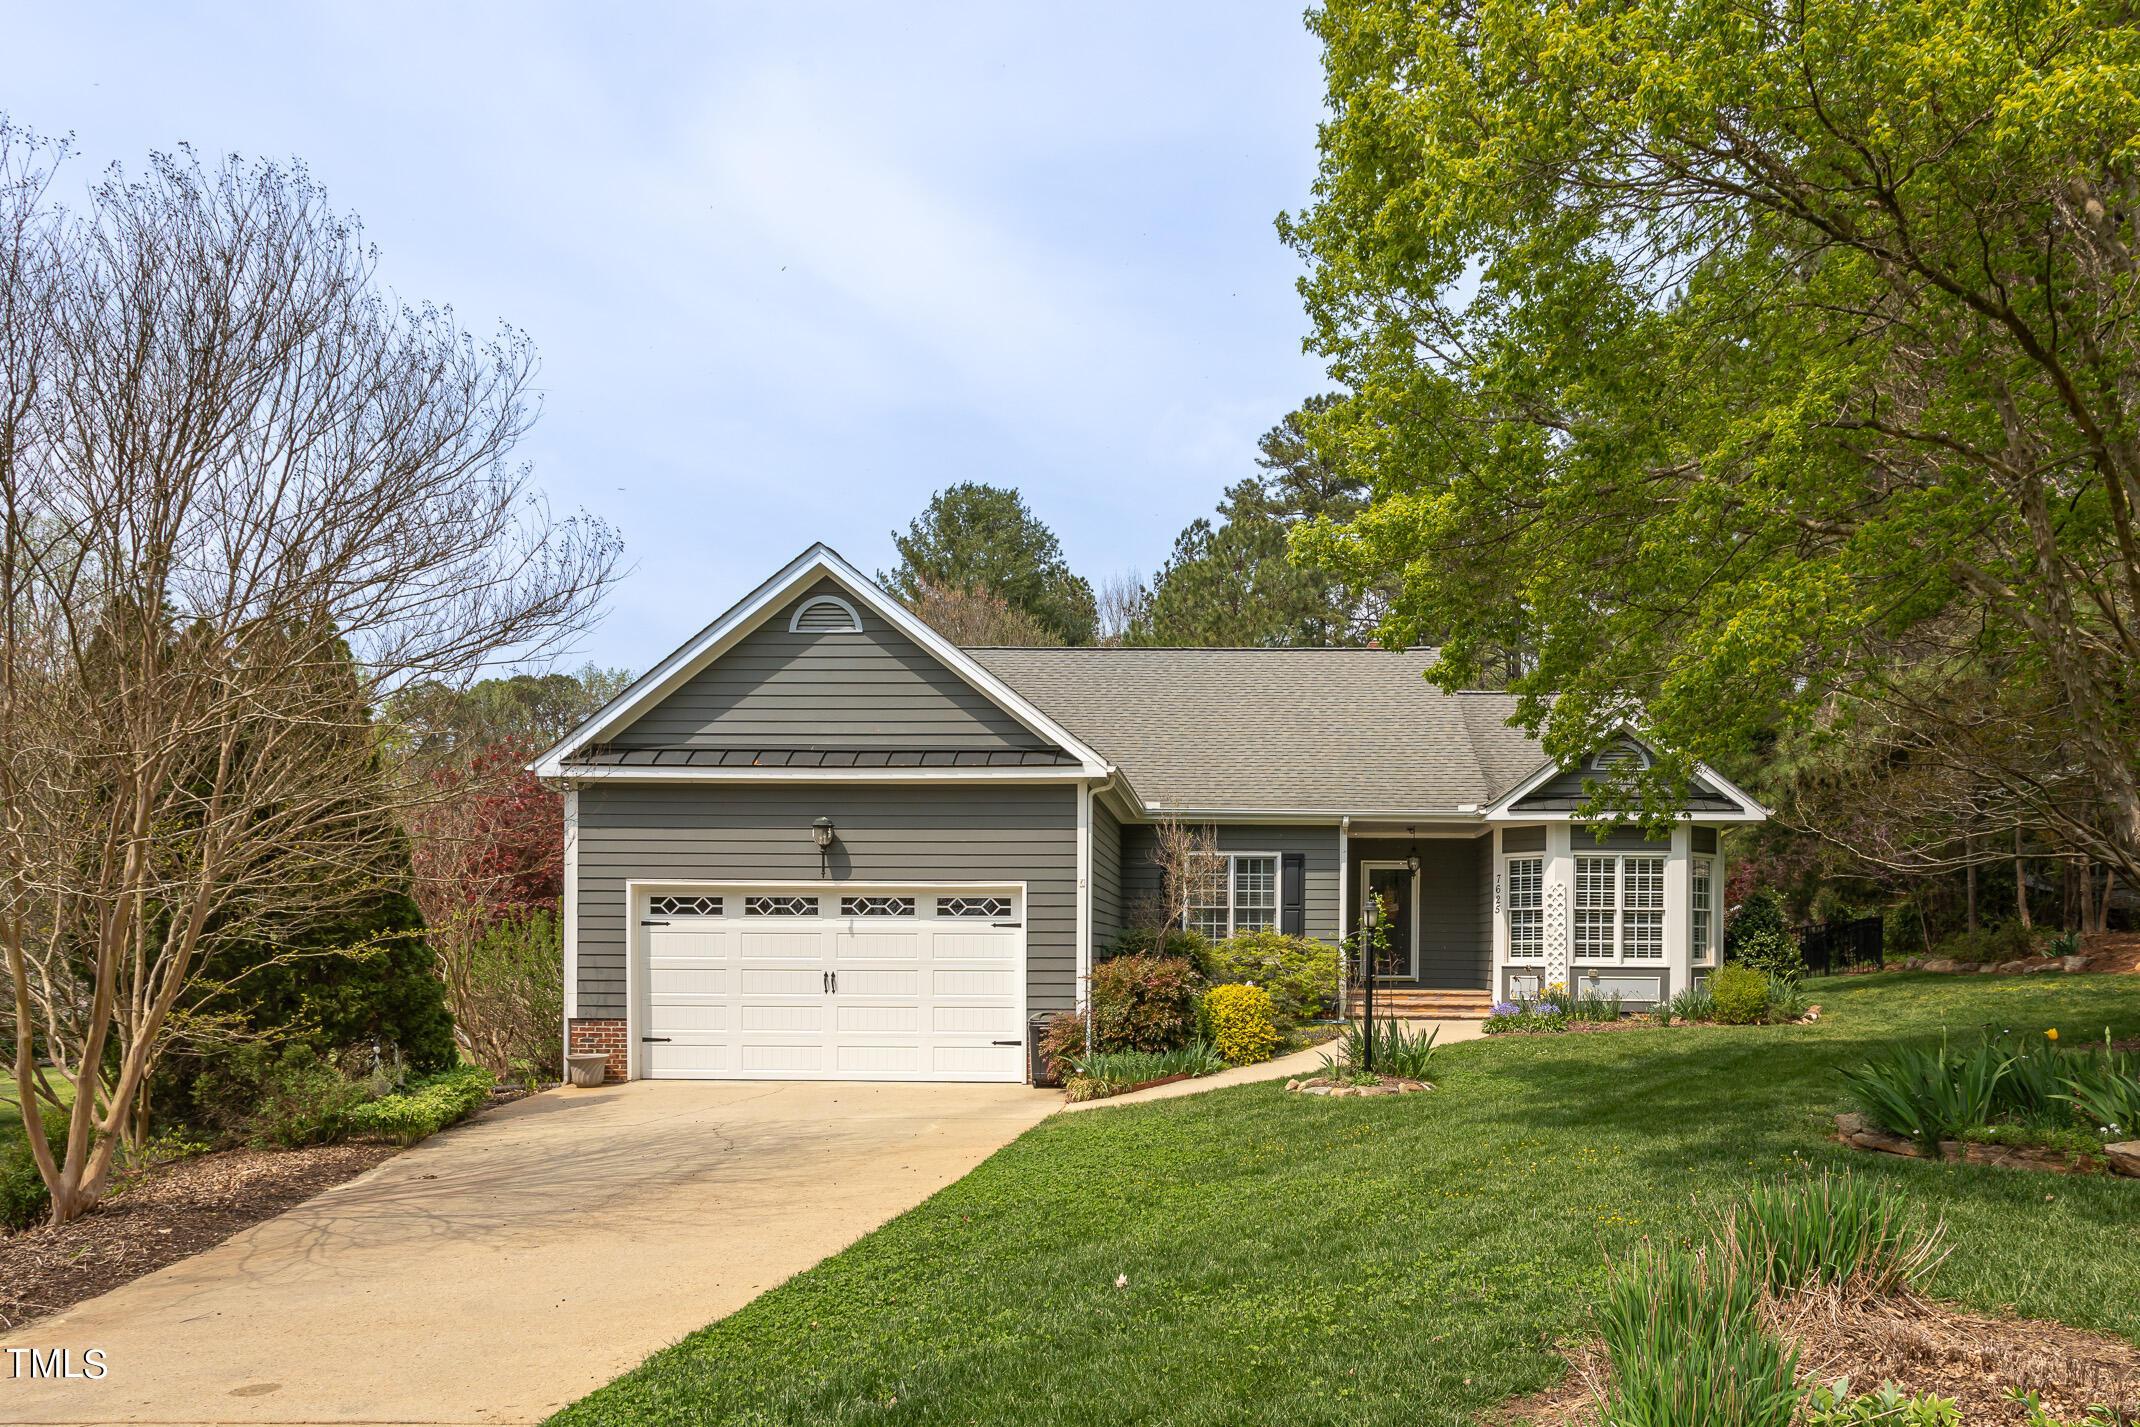 Photo one of 7625 Heuristic Way Wake Forest NC 27587 | MLS 10021217